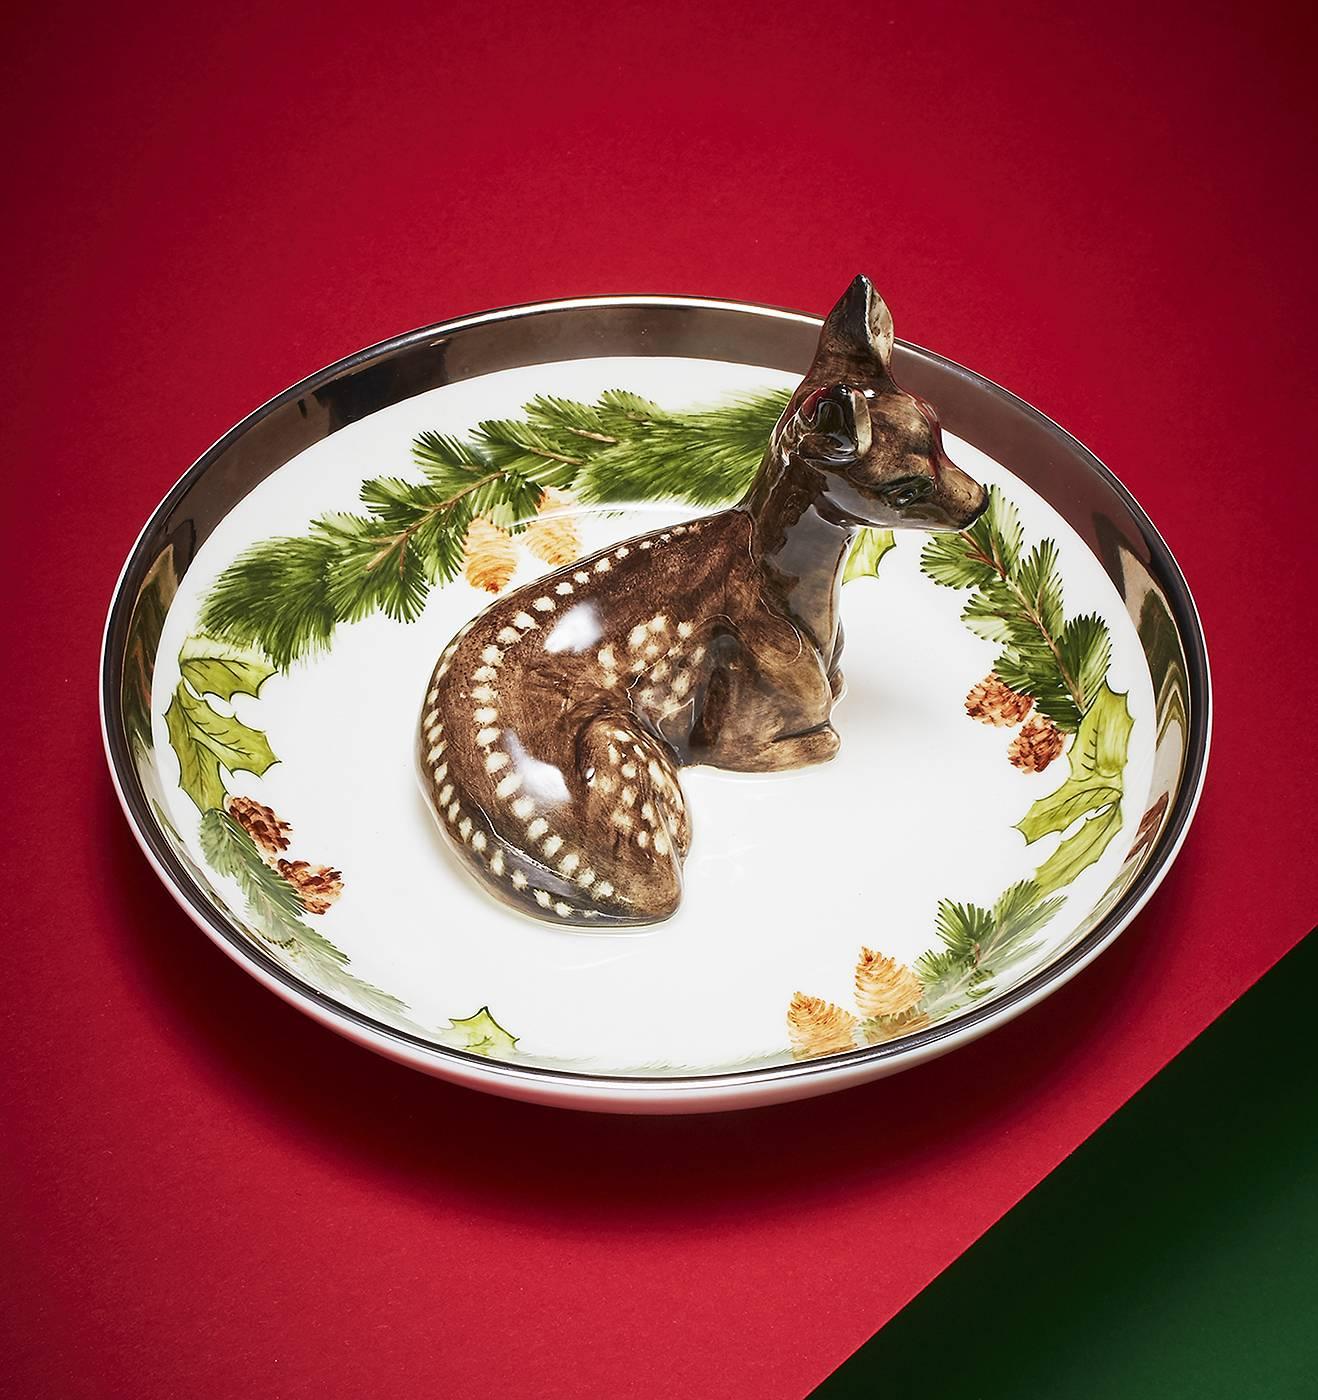 Completely handmade porcelain bowl with a hands-free painted bambi in the center of the bowl. The charming bambi figure is painted in black and sits in the middle of the dish. The porcelain dish is platinum framed and decorated with a beautiful